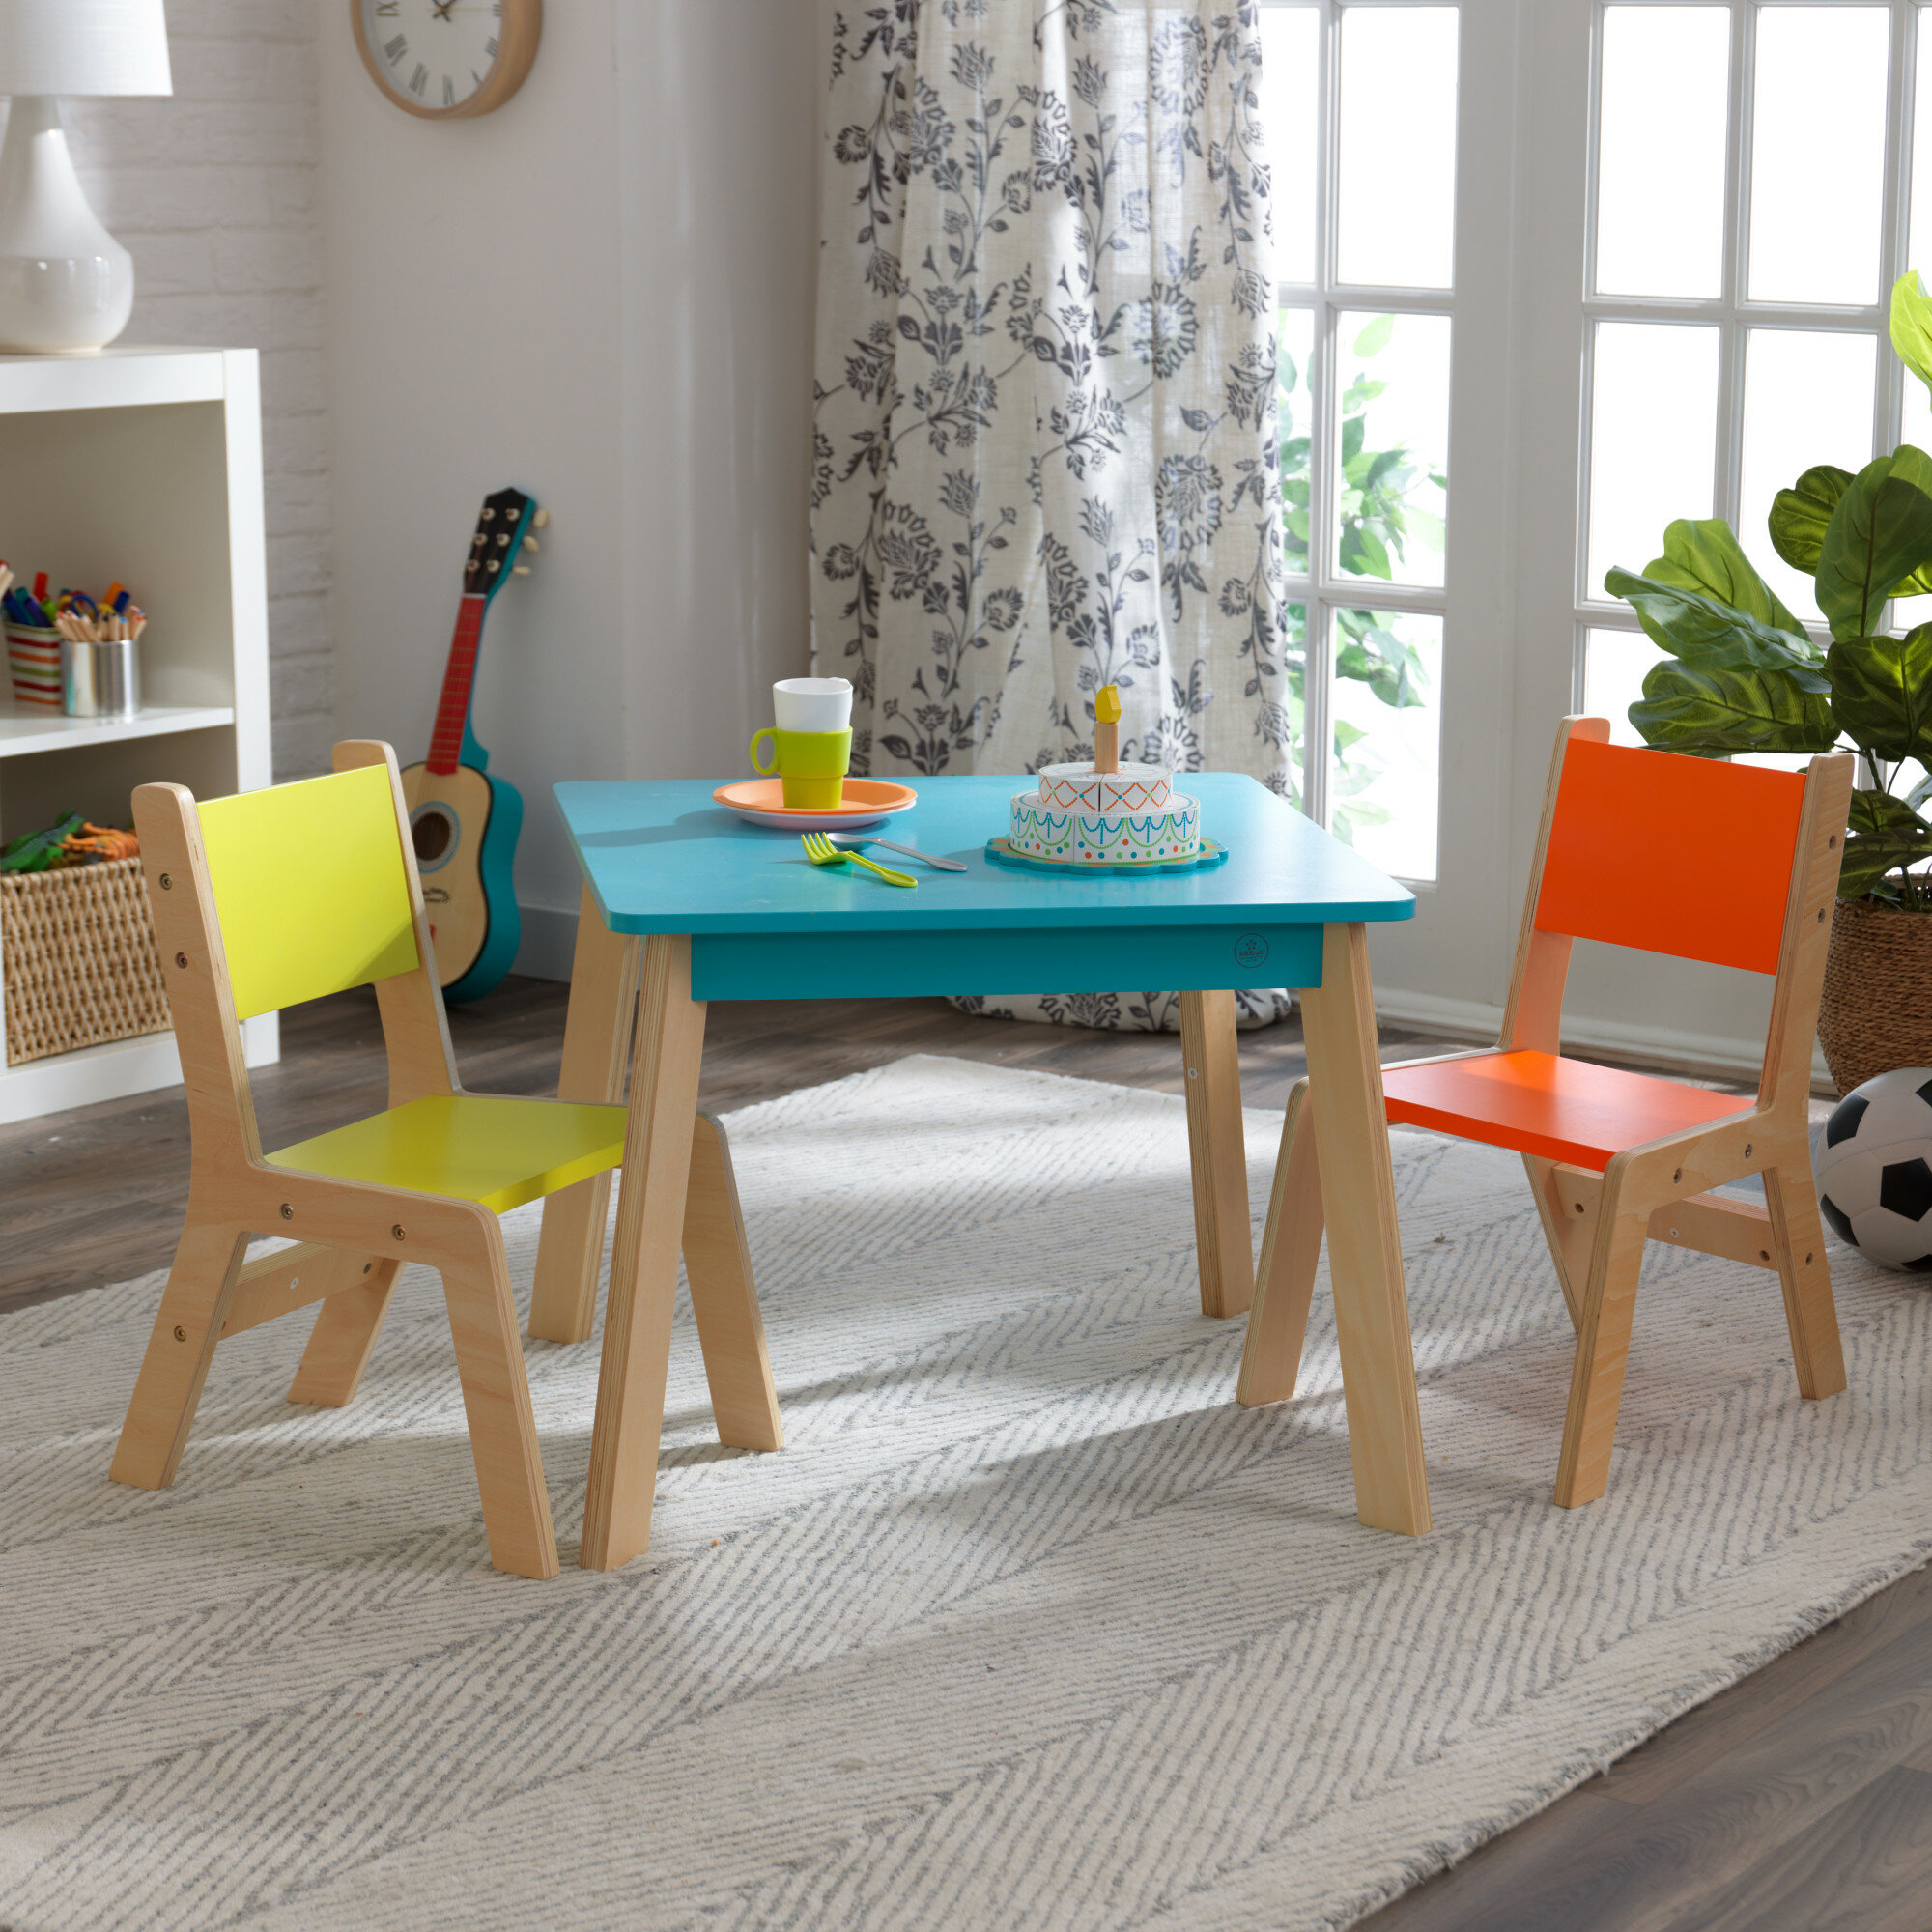 childrens playroom table